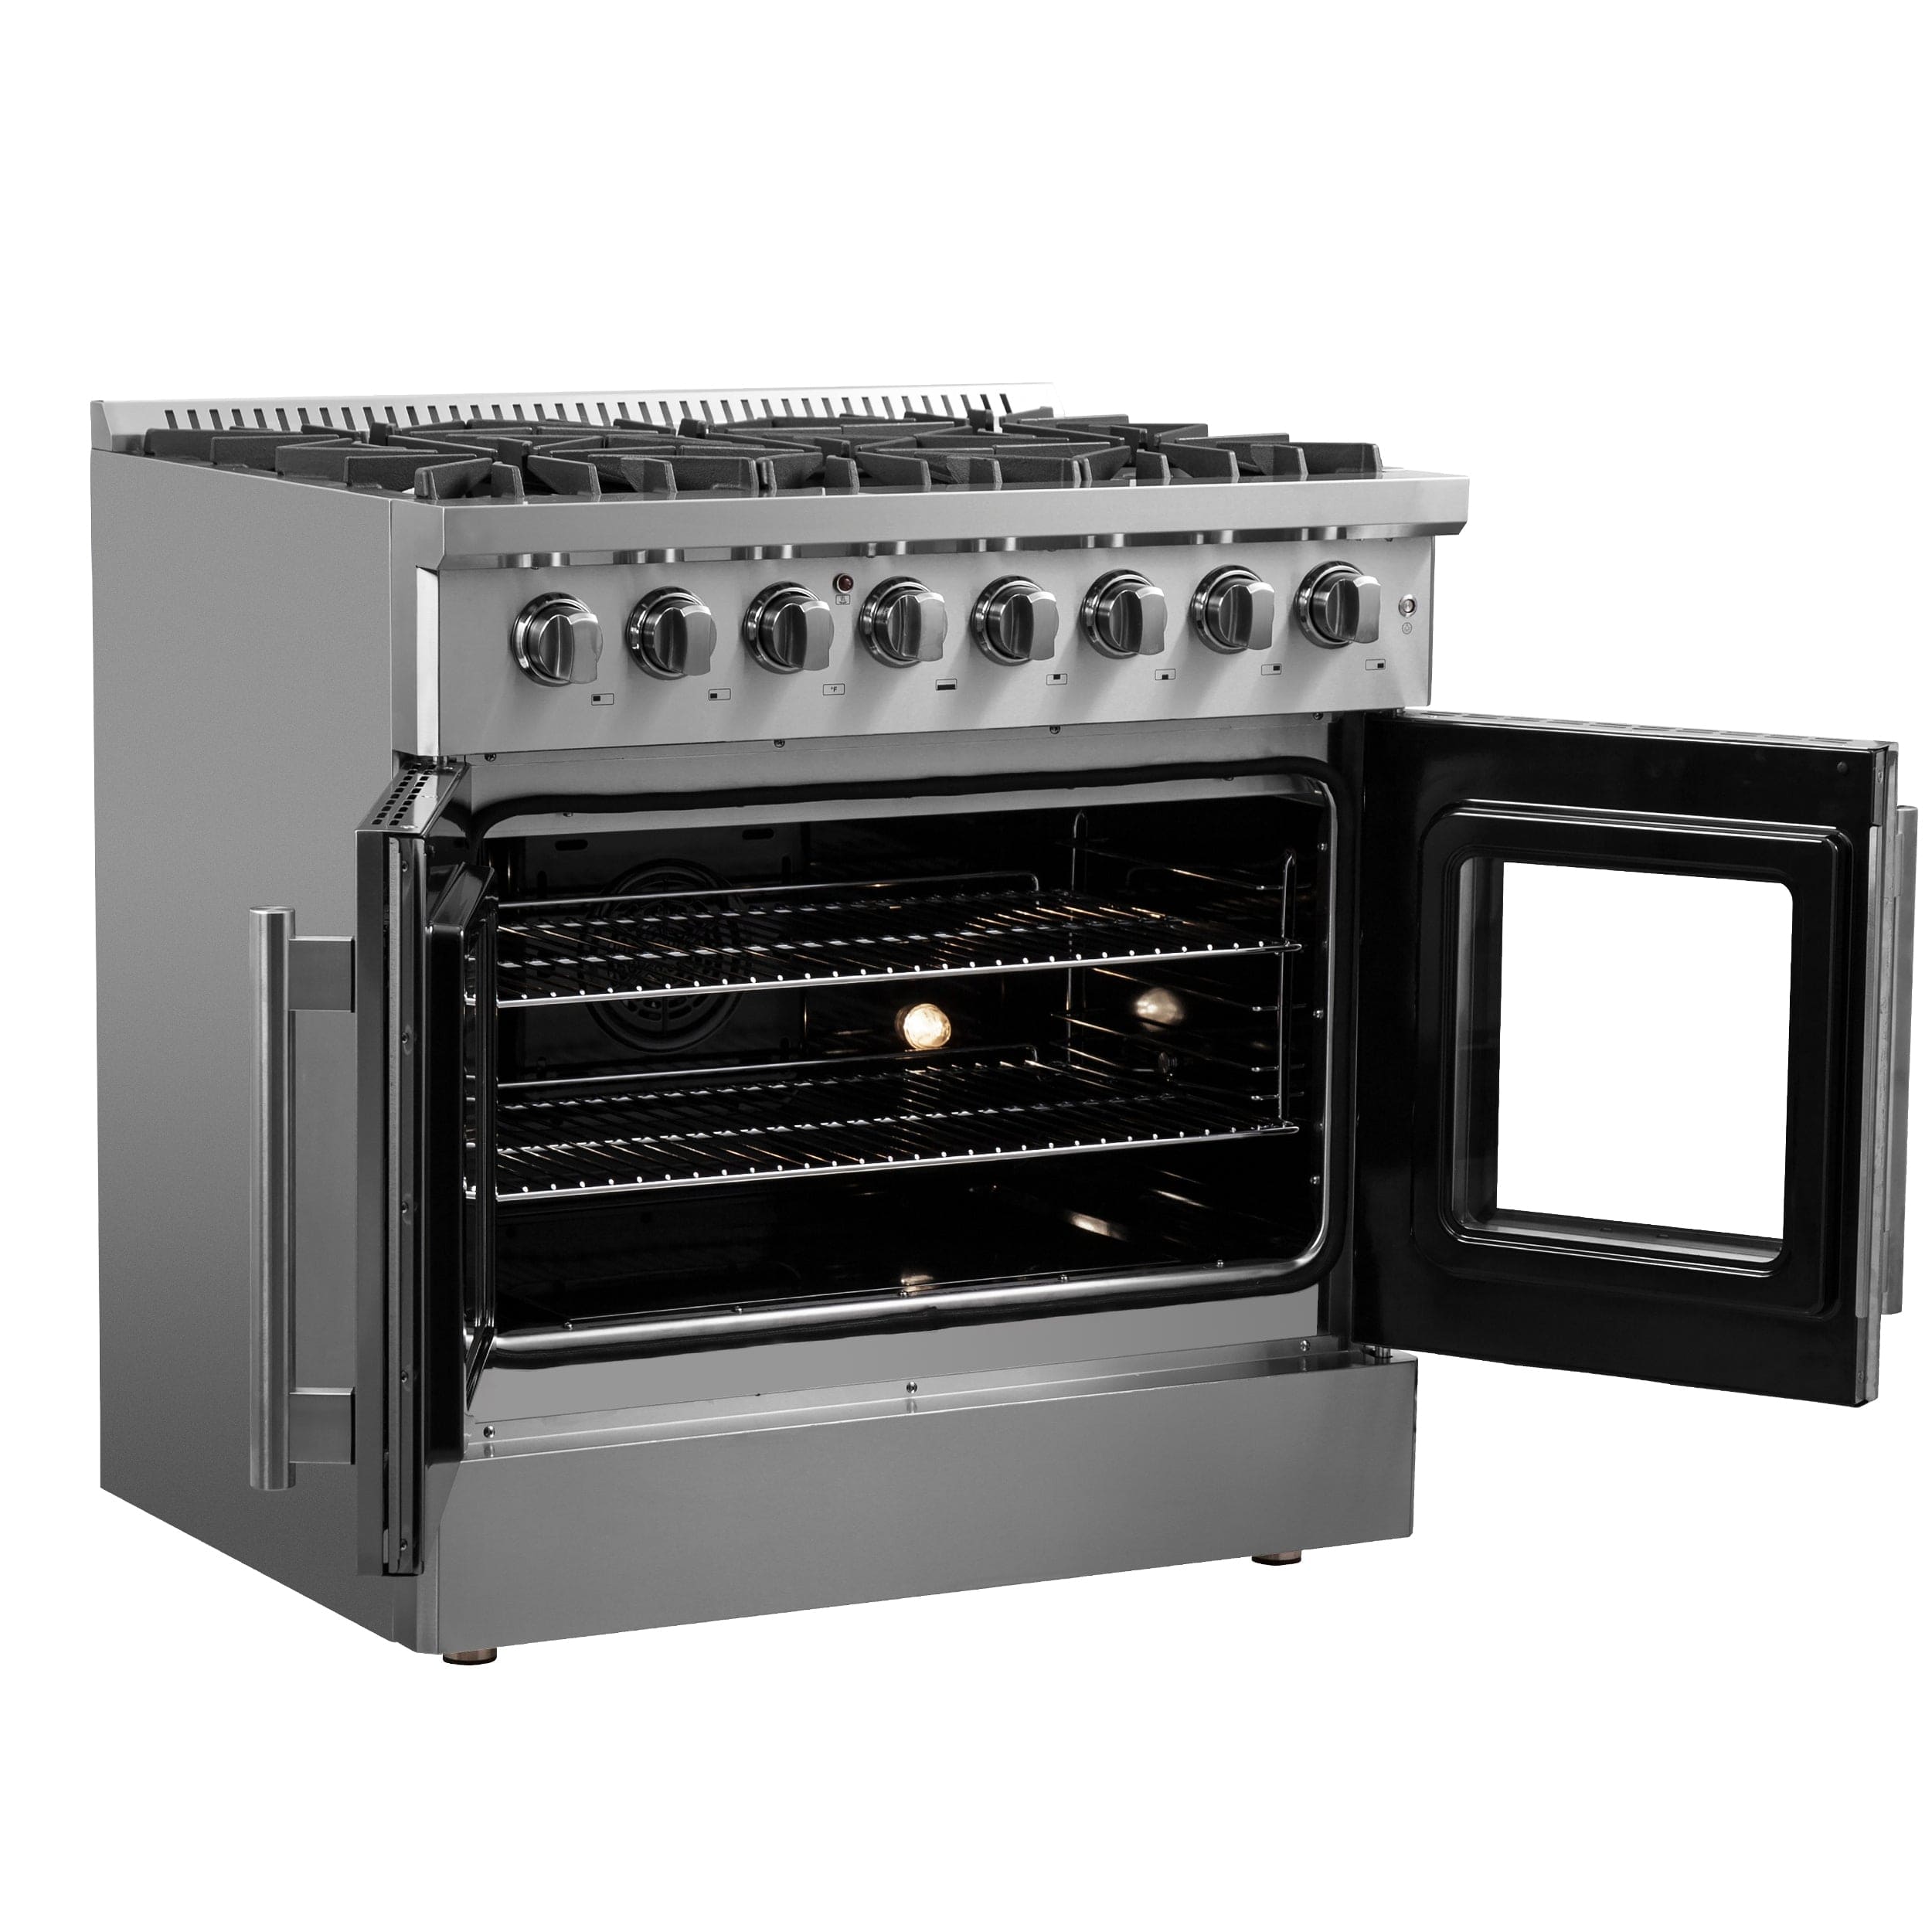 Forno Galiano 36" Gas Burner, Electric Oven Range With French Door in Stainless Steel, FFSGS6356-36 Ranges FFSGS6356-36 Luxury Appliances Direct